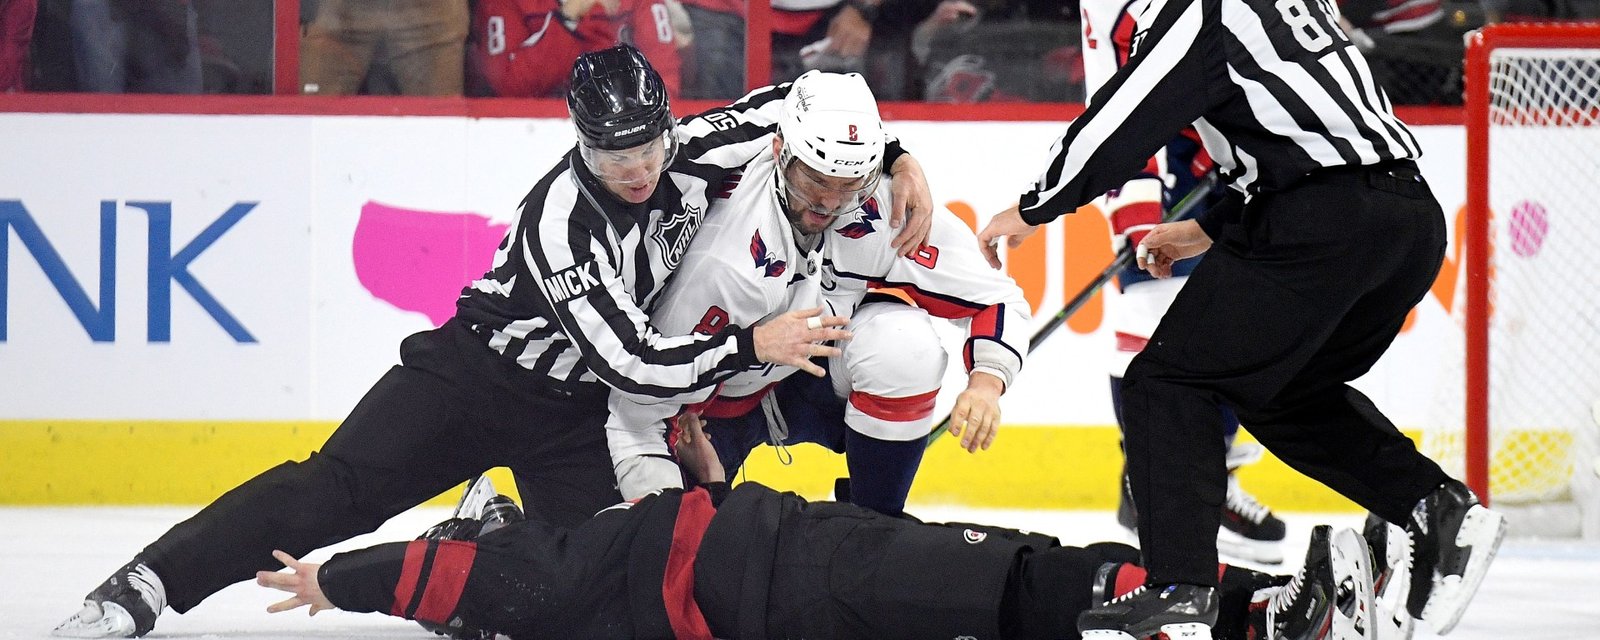 Ovechkin's victim Svechnikov rushed to the hospital after knockout punch in Game 3 